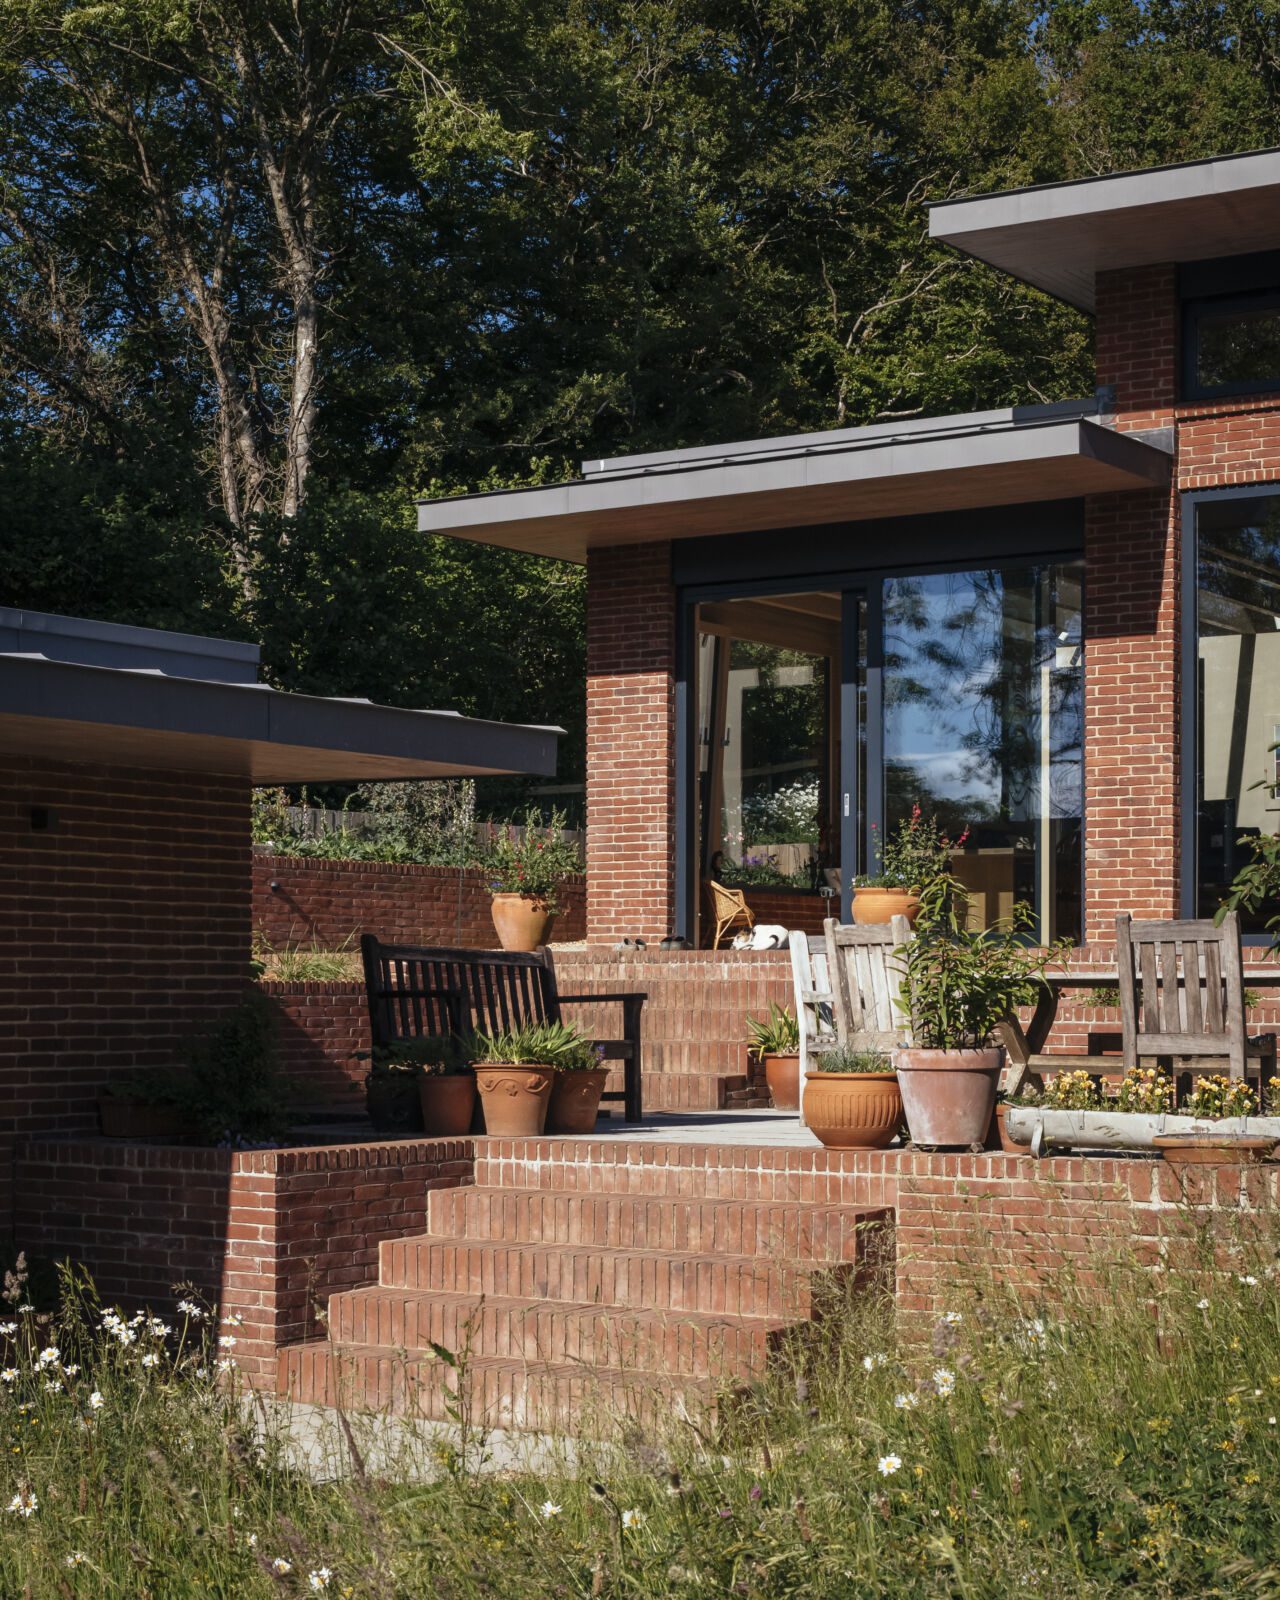 A set of terraces forms outdoor spaces at the Gardener's Cottage